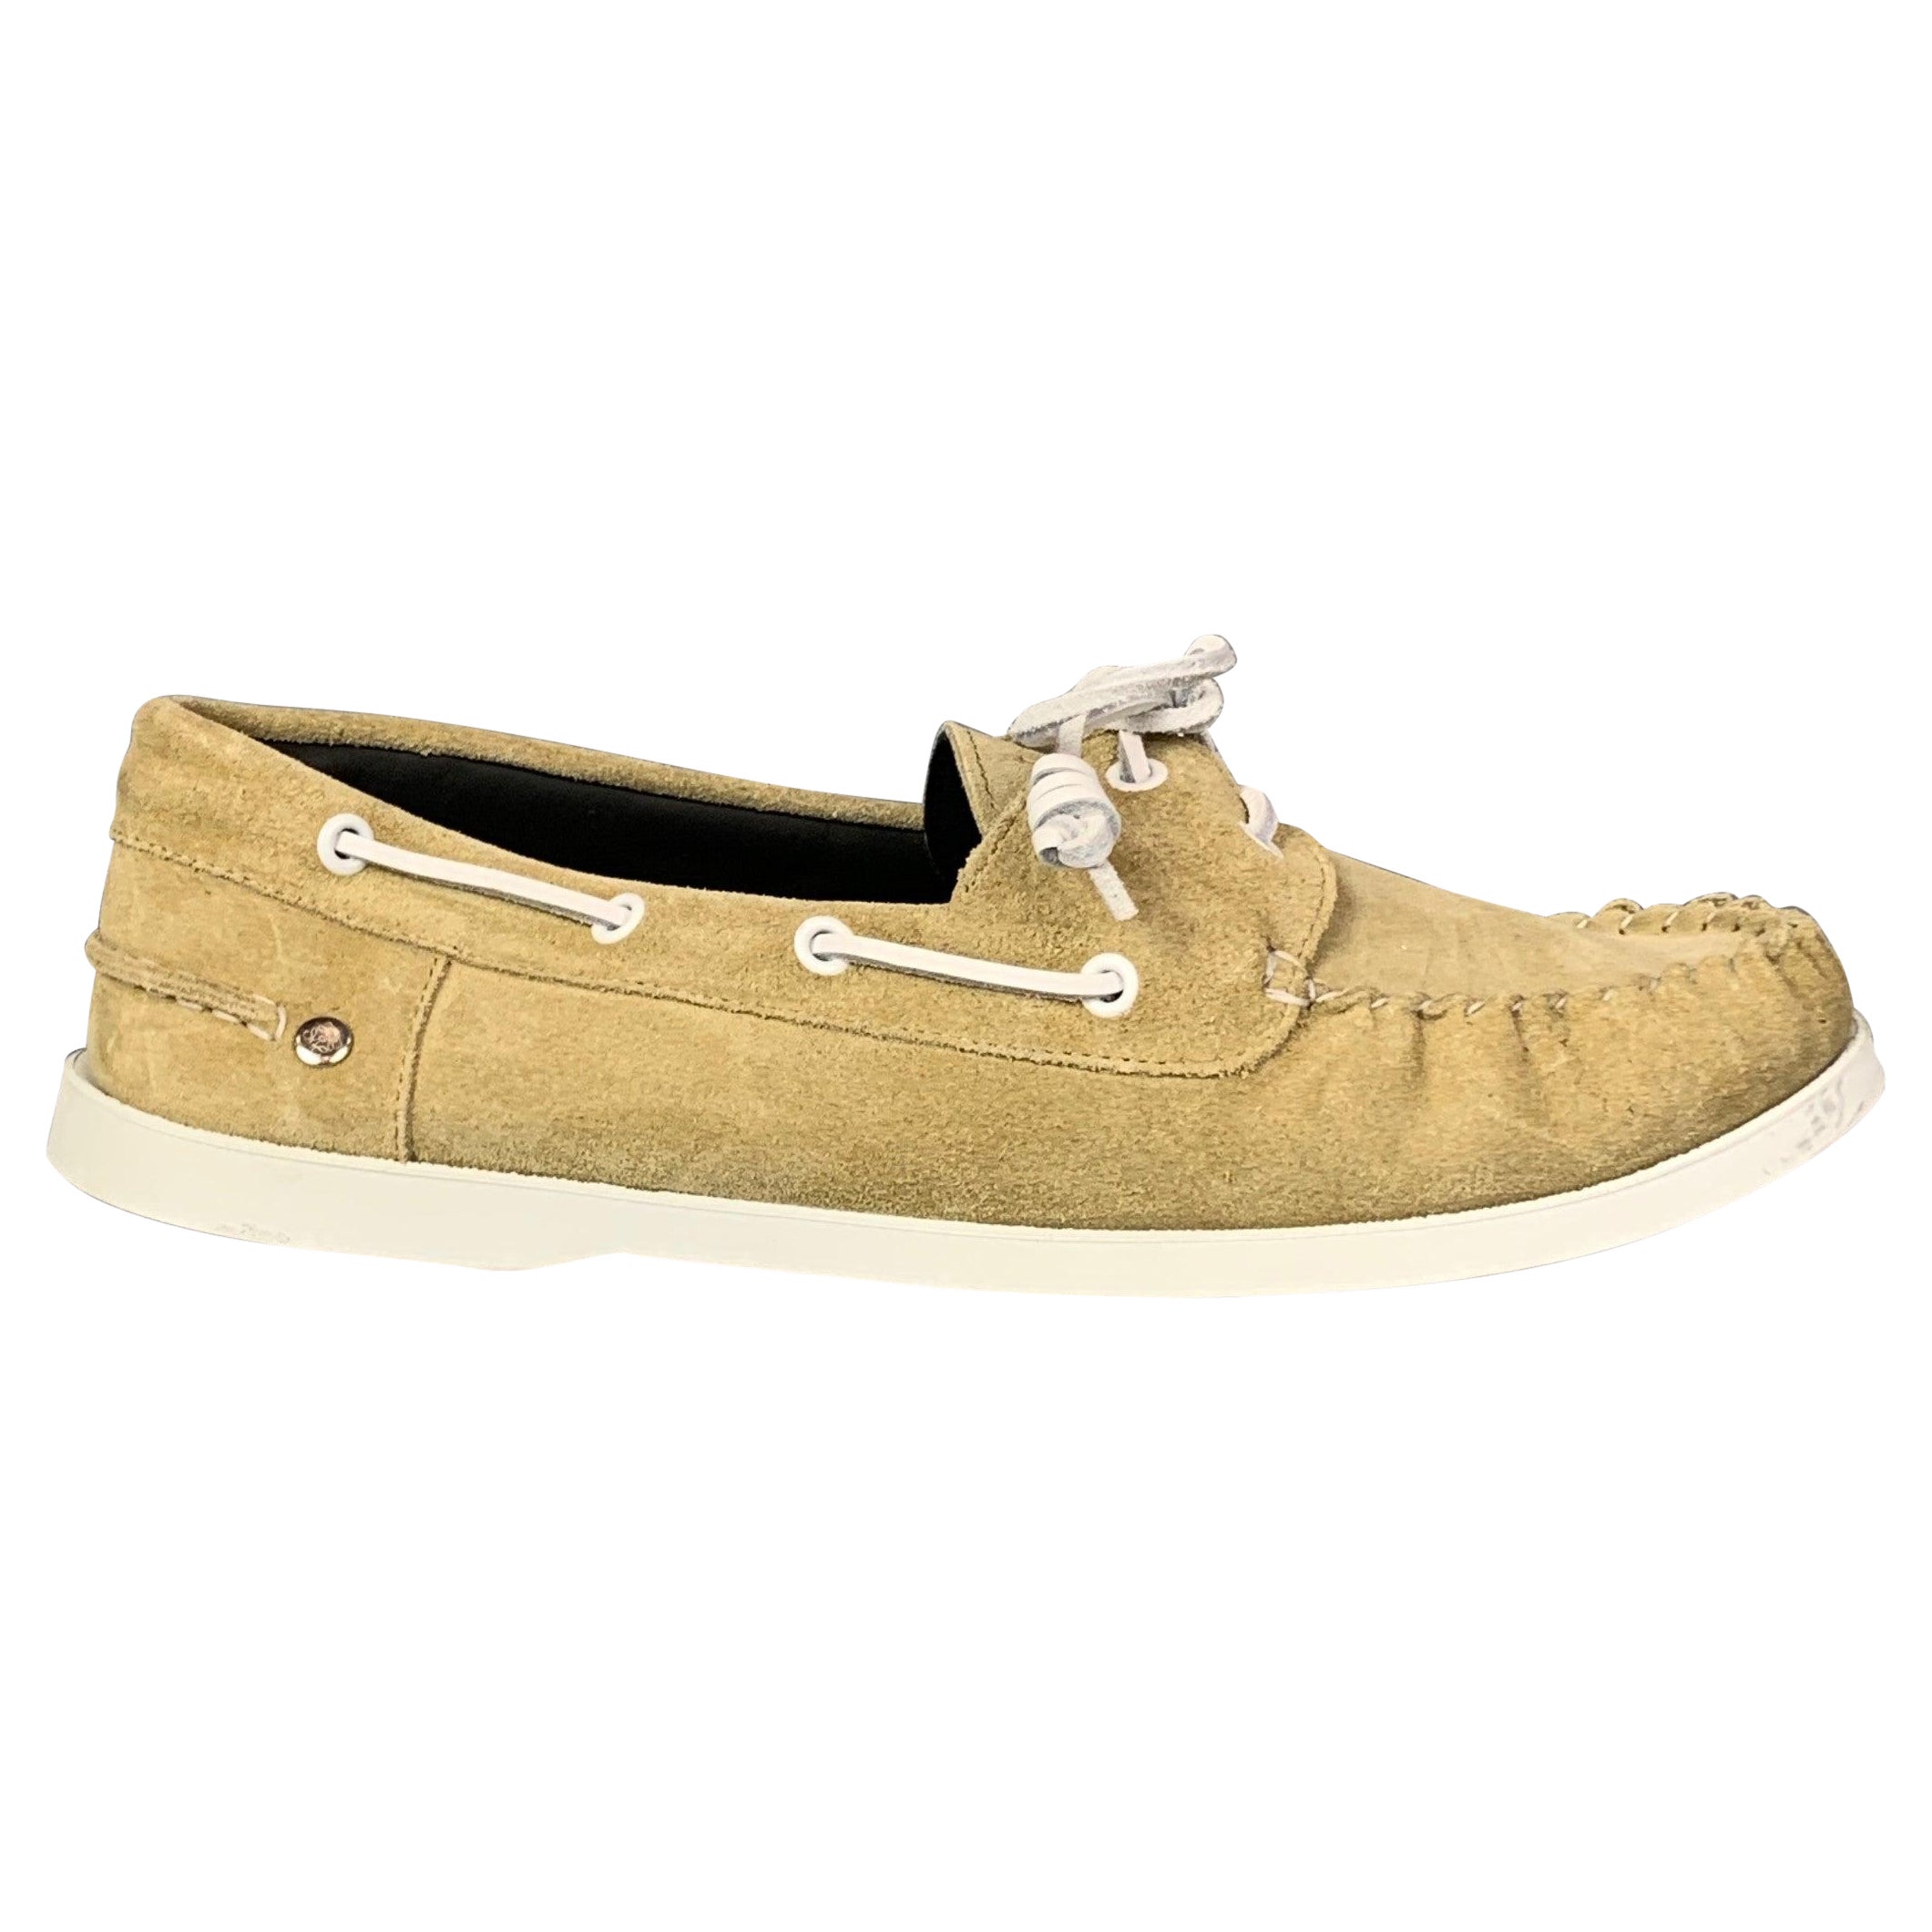 LOEWE Size 11 Natural Leather Boat Shoe Loafers For Sale